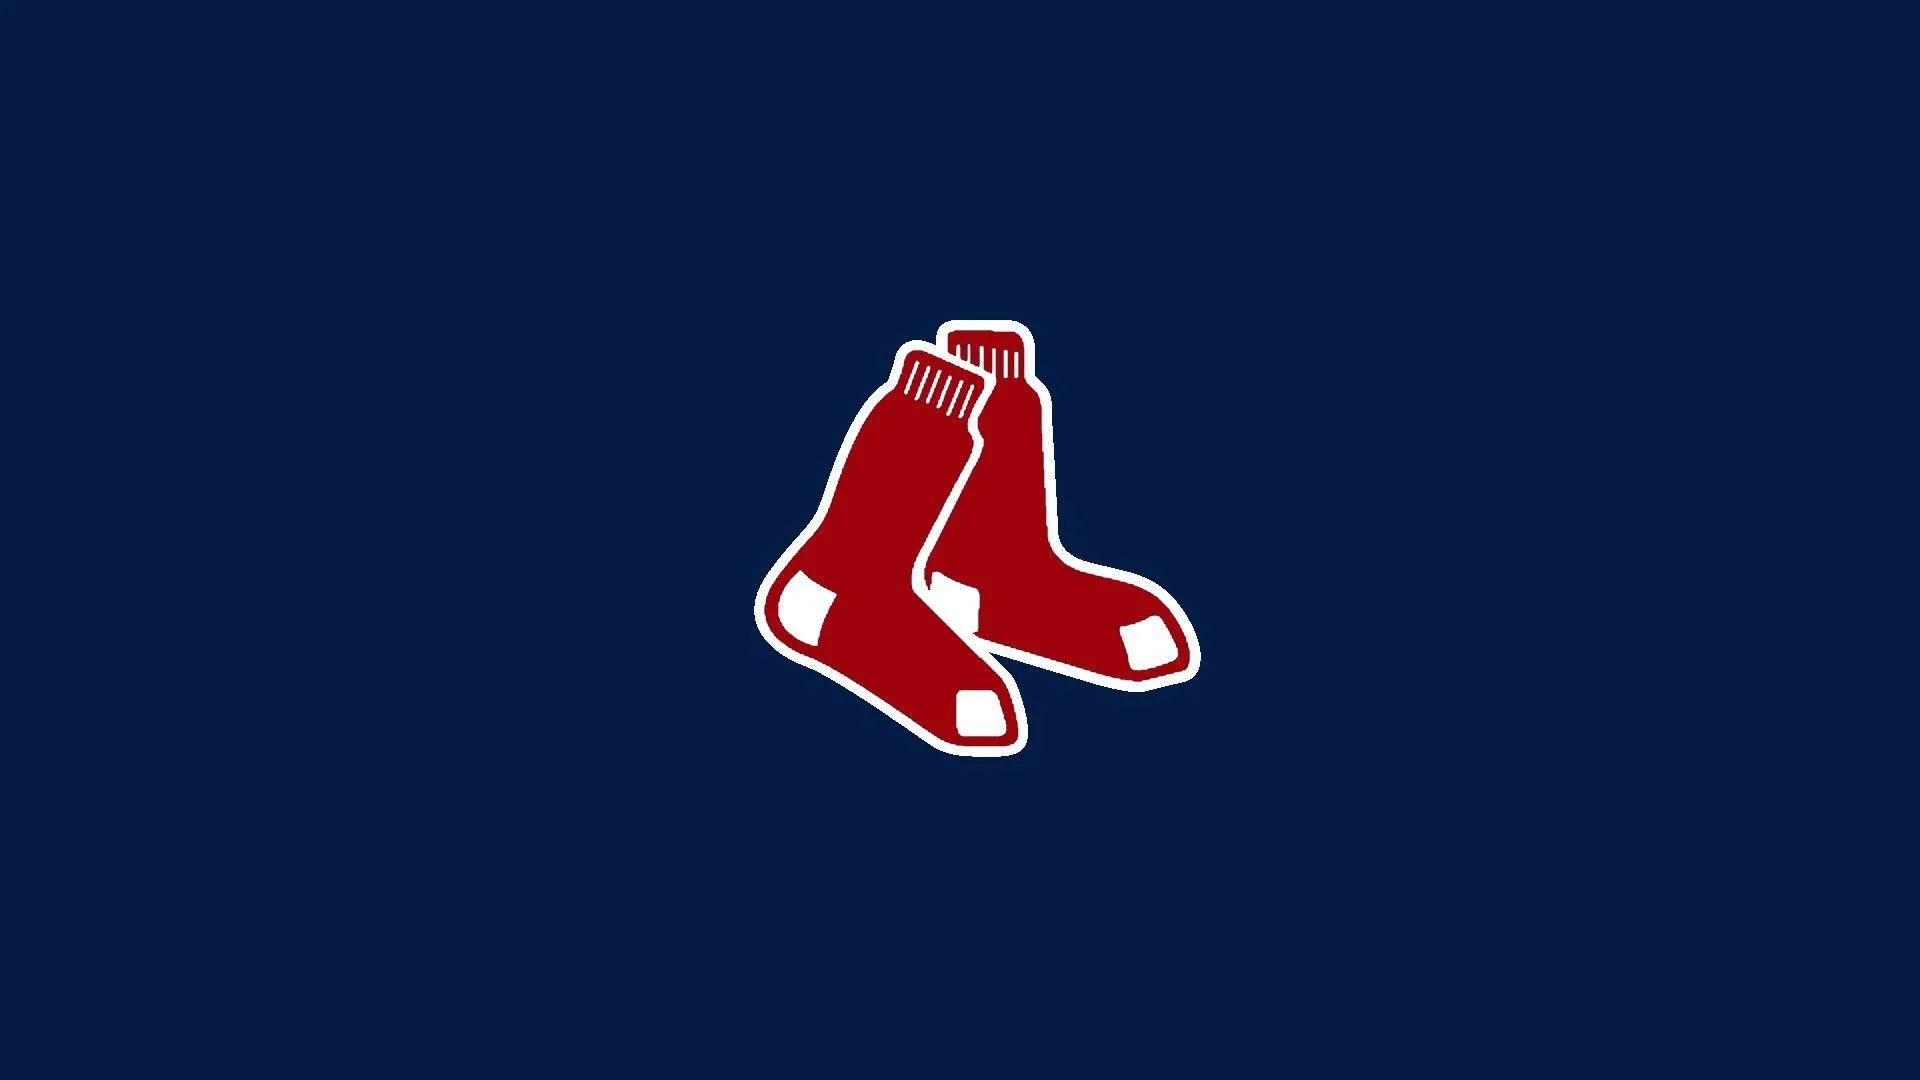 1920x1080 Boston Red Sox Wallpapers Top Free Boston Red Sox Backgrounds